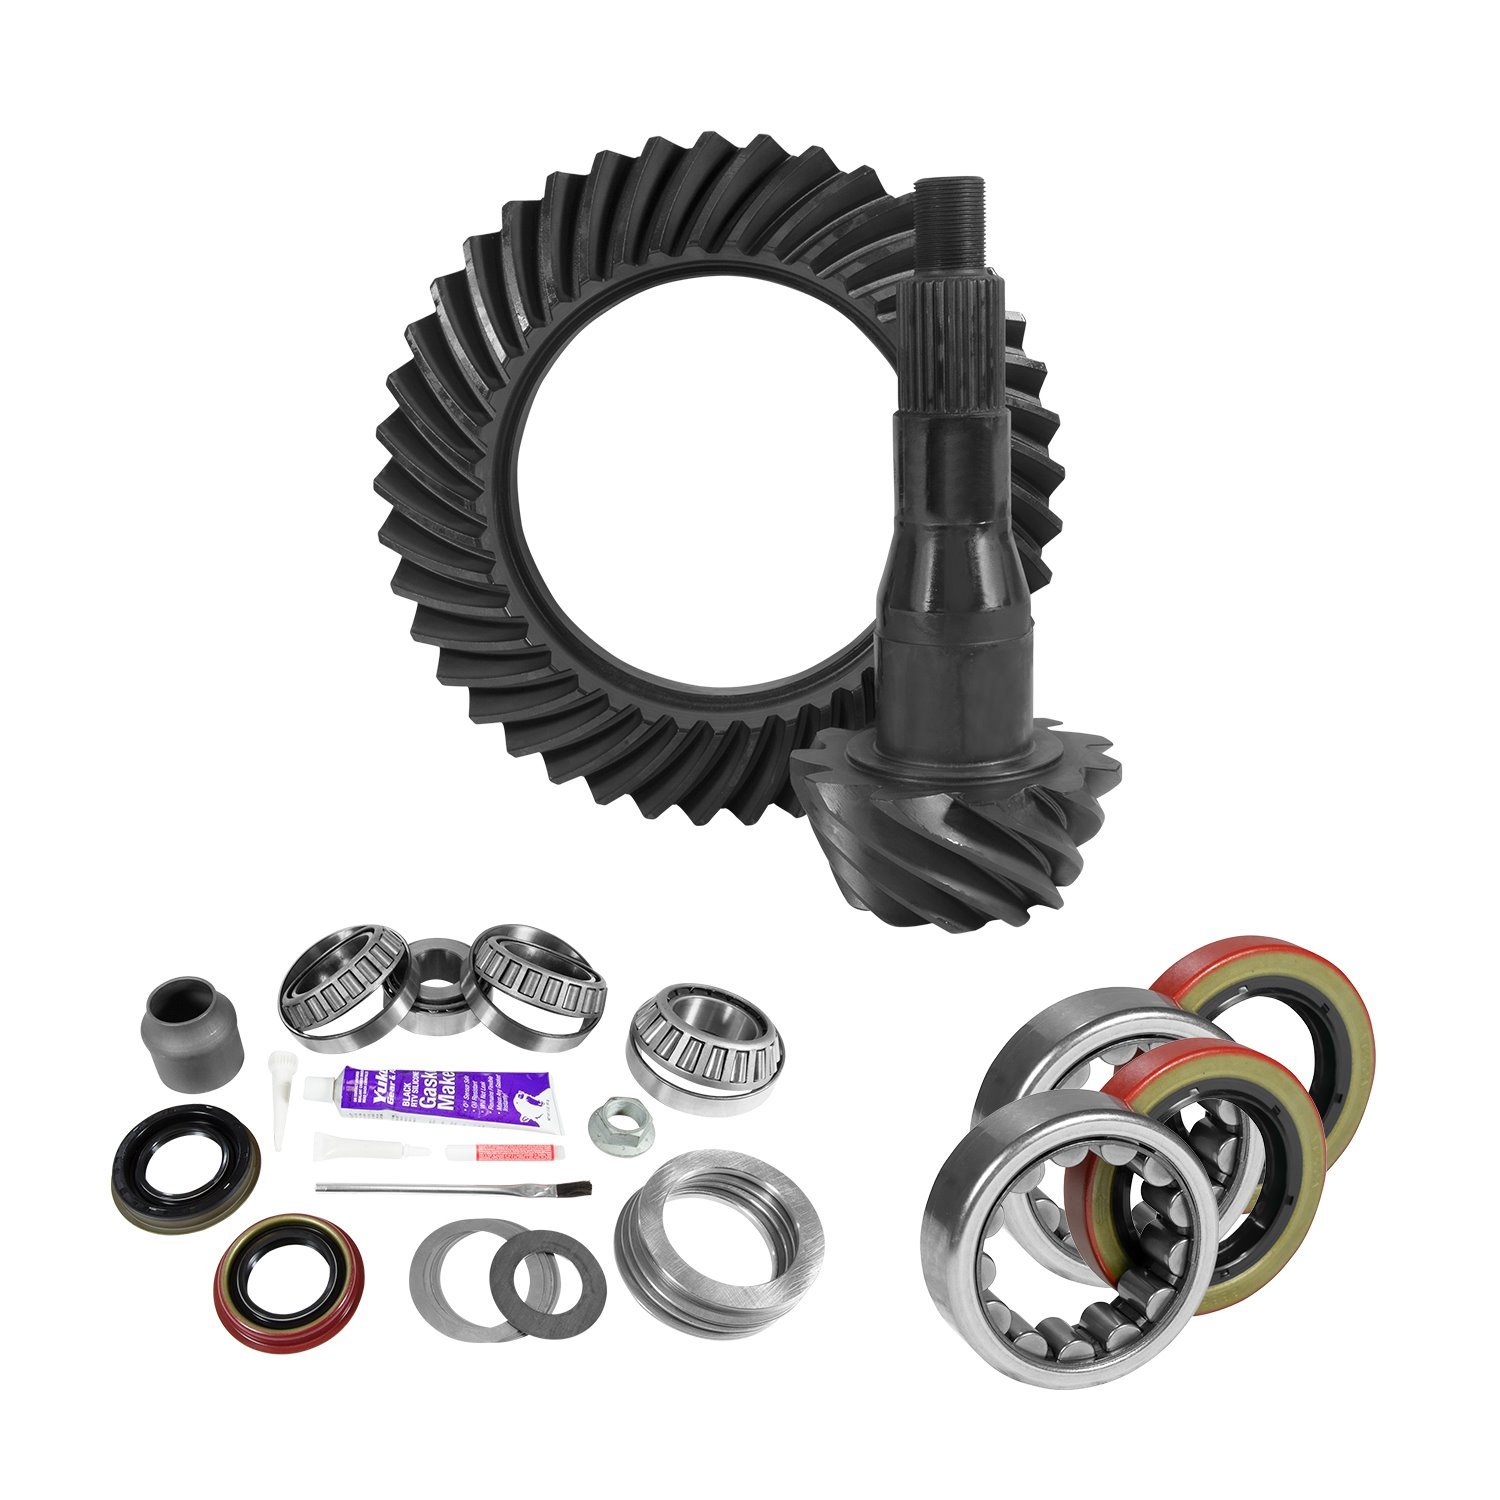 USA Standard 10801 9.75 in. Ford 4.11 Rear Ring & Pinion Install Kit, 2.53 in. Od Axle Bearings & Seal